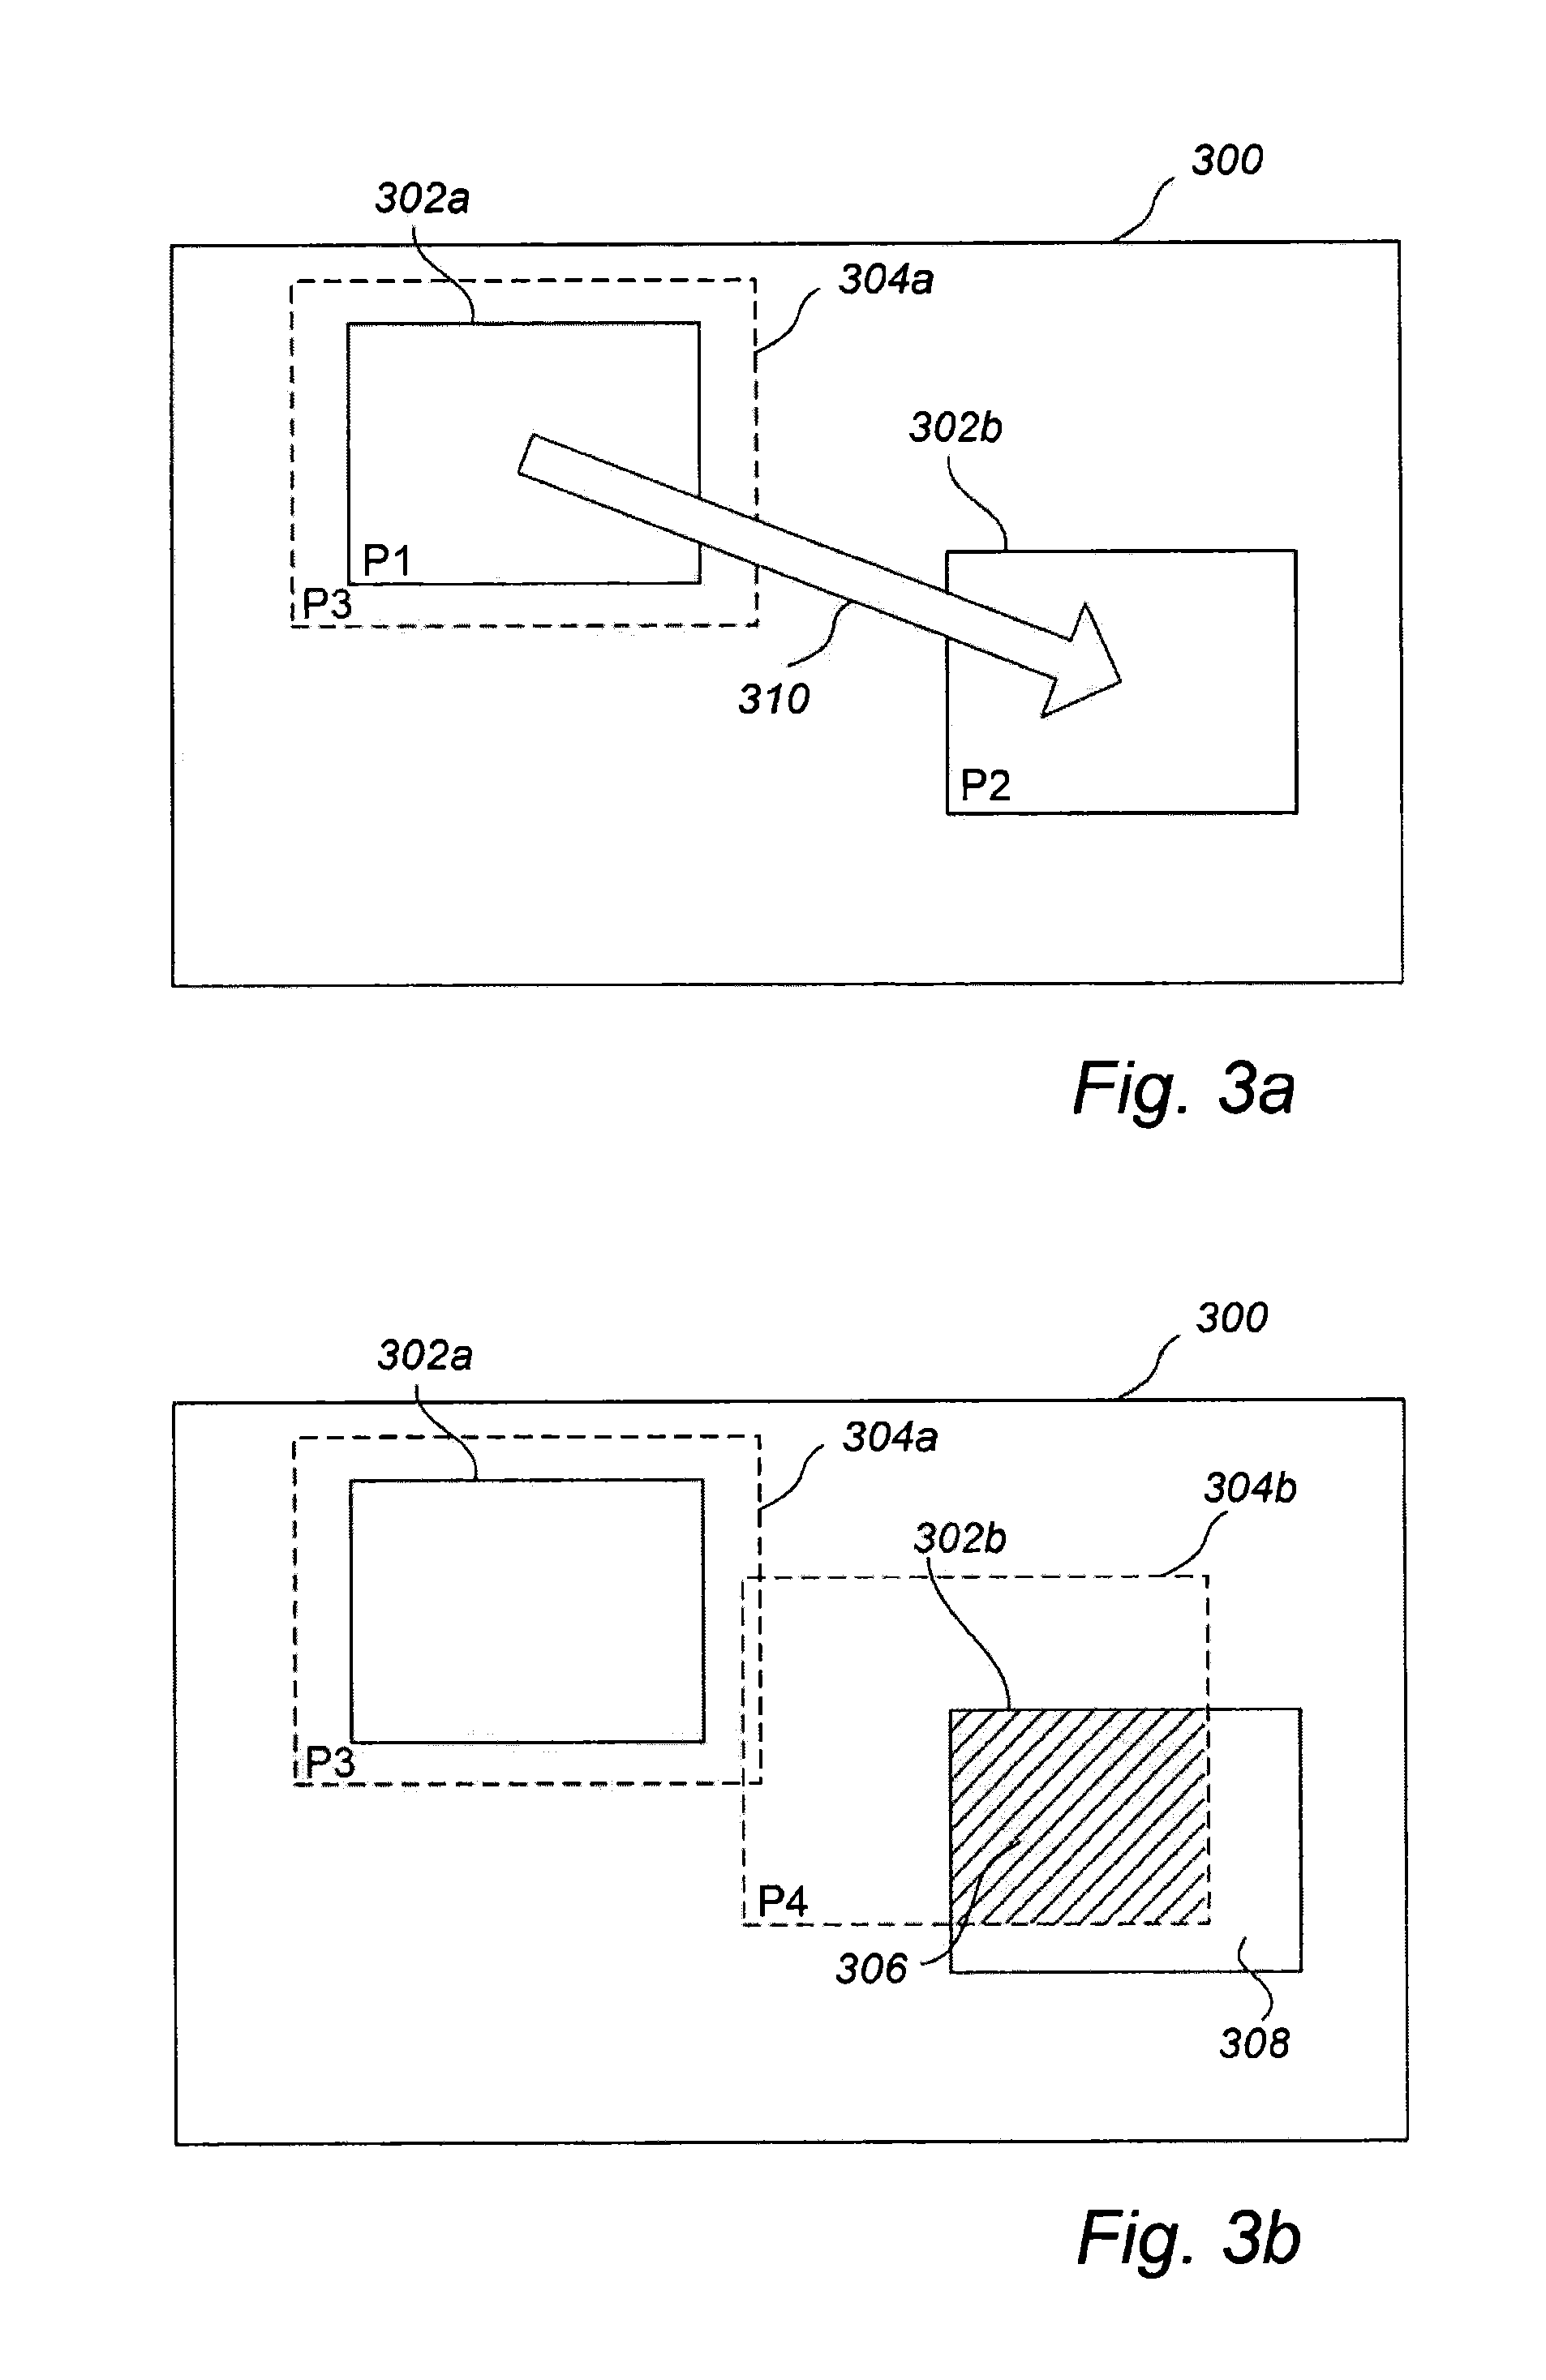 Control of an image capturing device